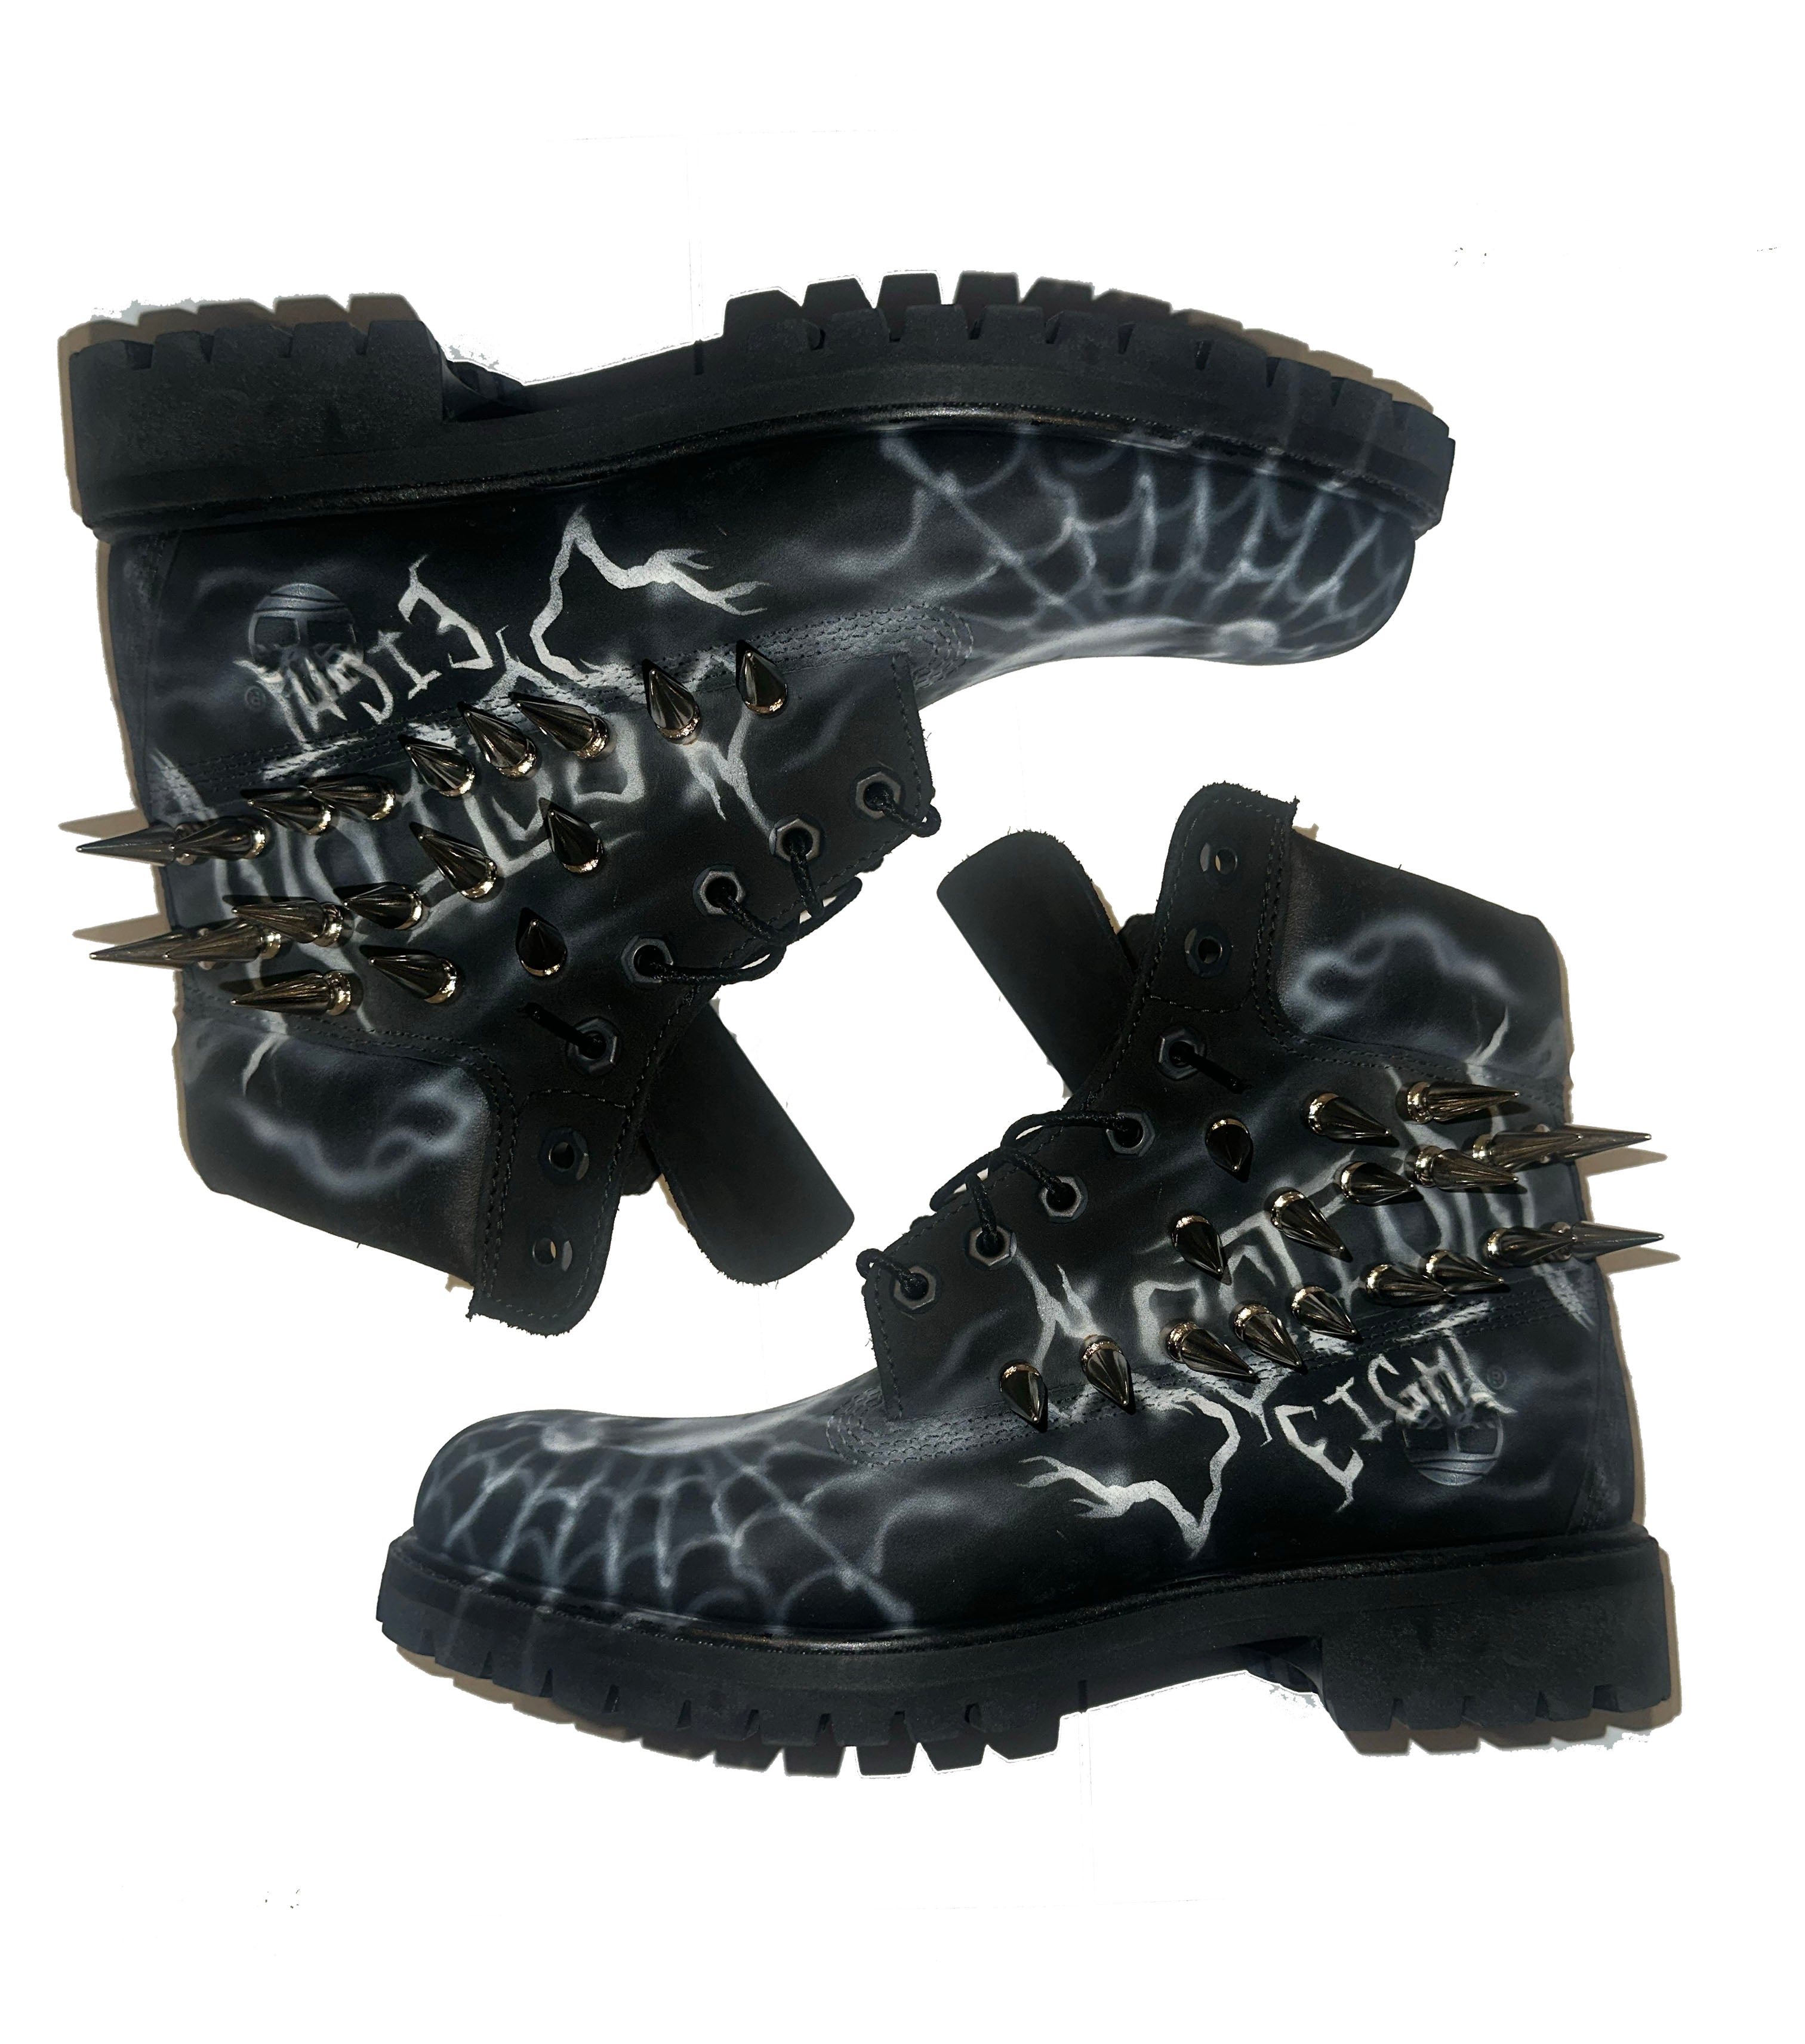 spike section8 x timberland RIP tombstone (airbrush)